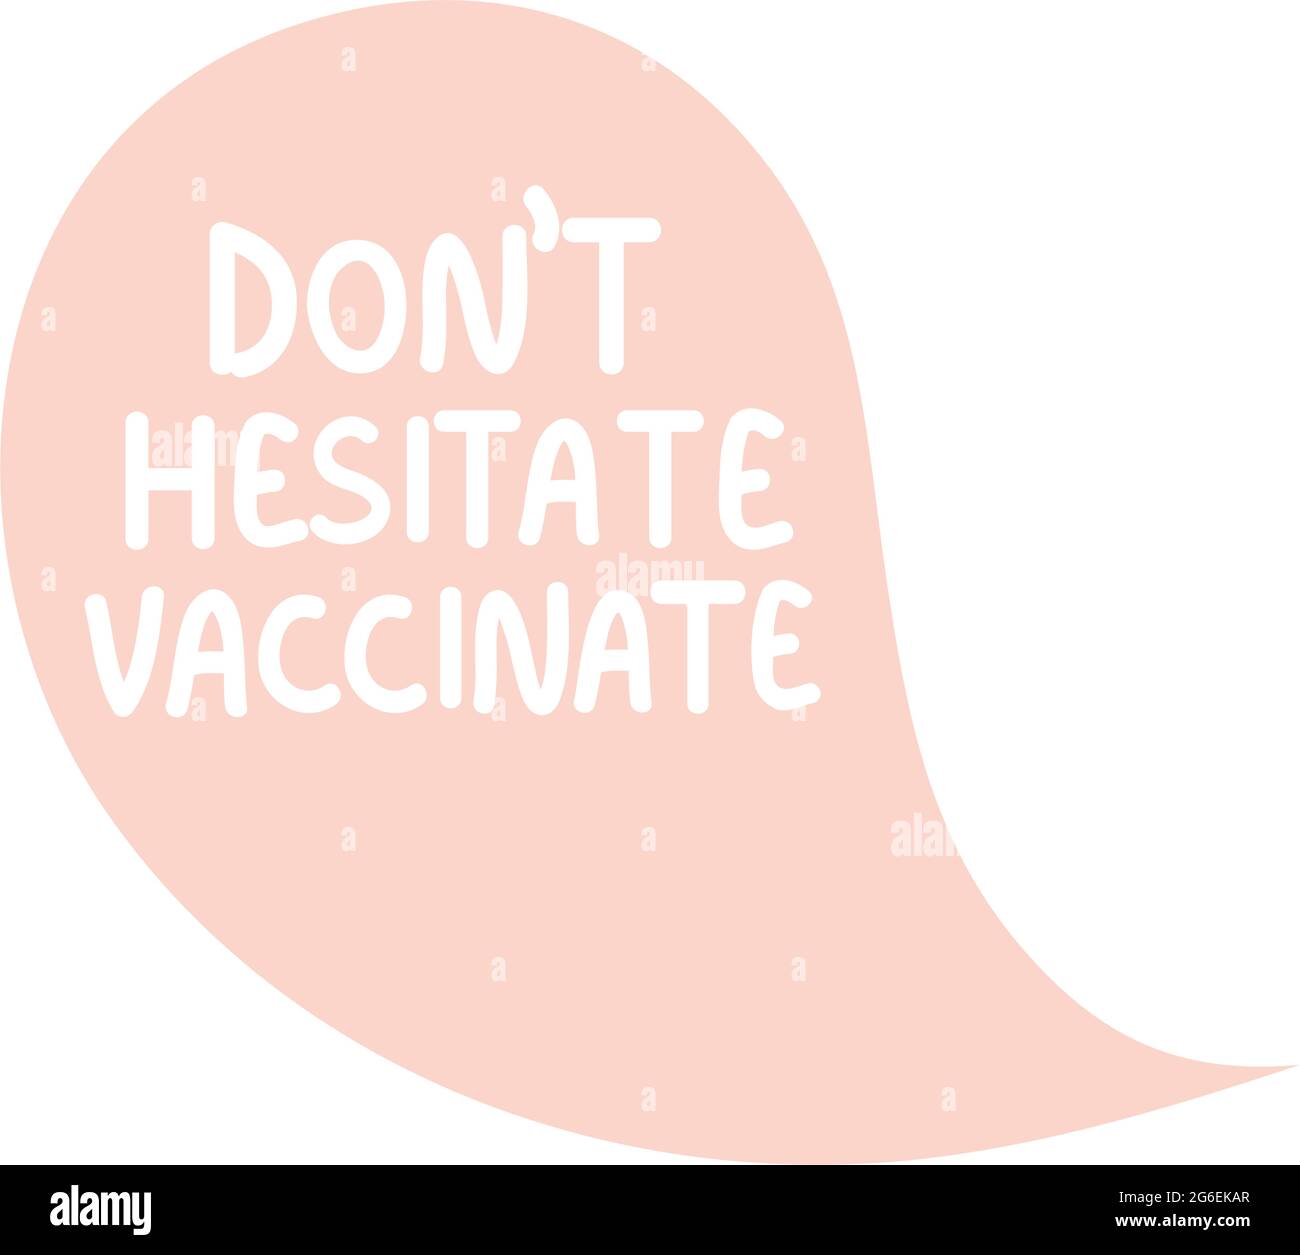 dont hesitate vaccinate Stock Vector